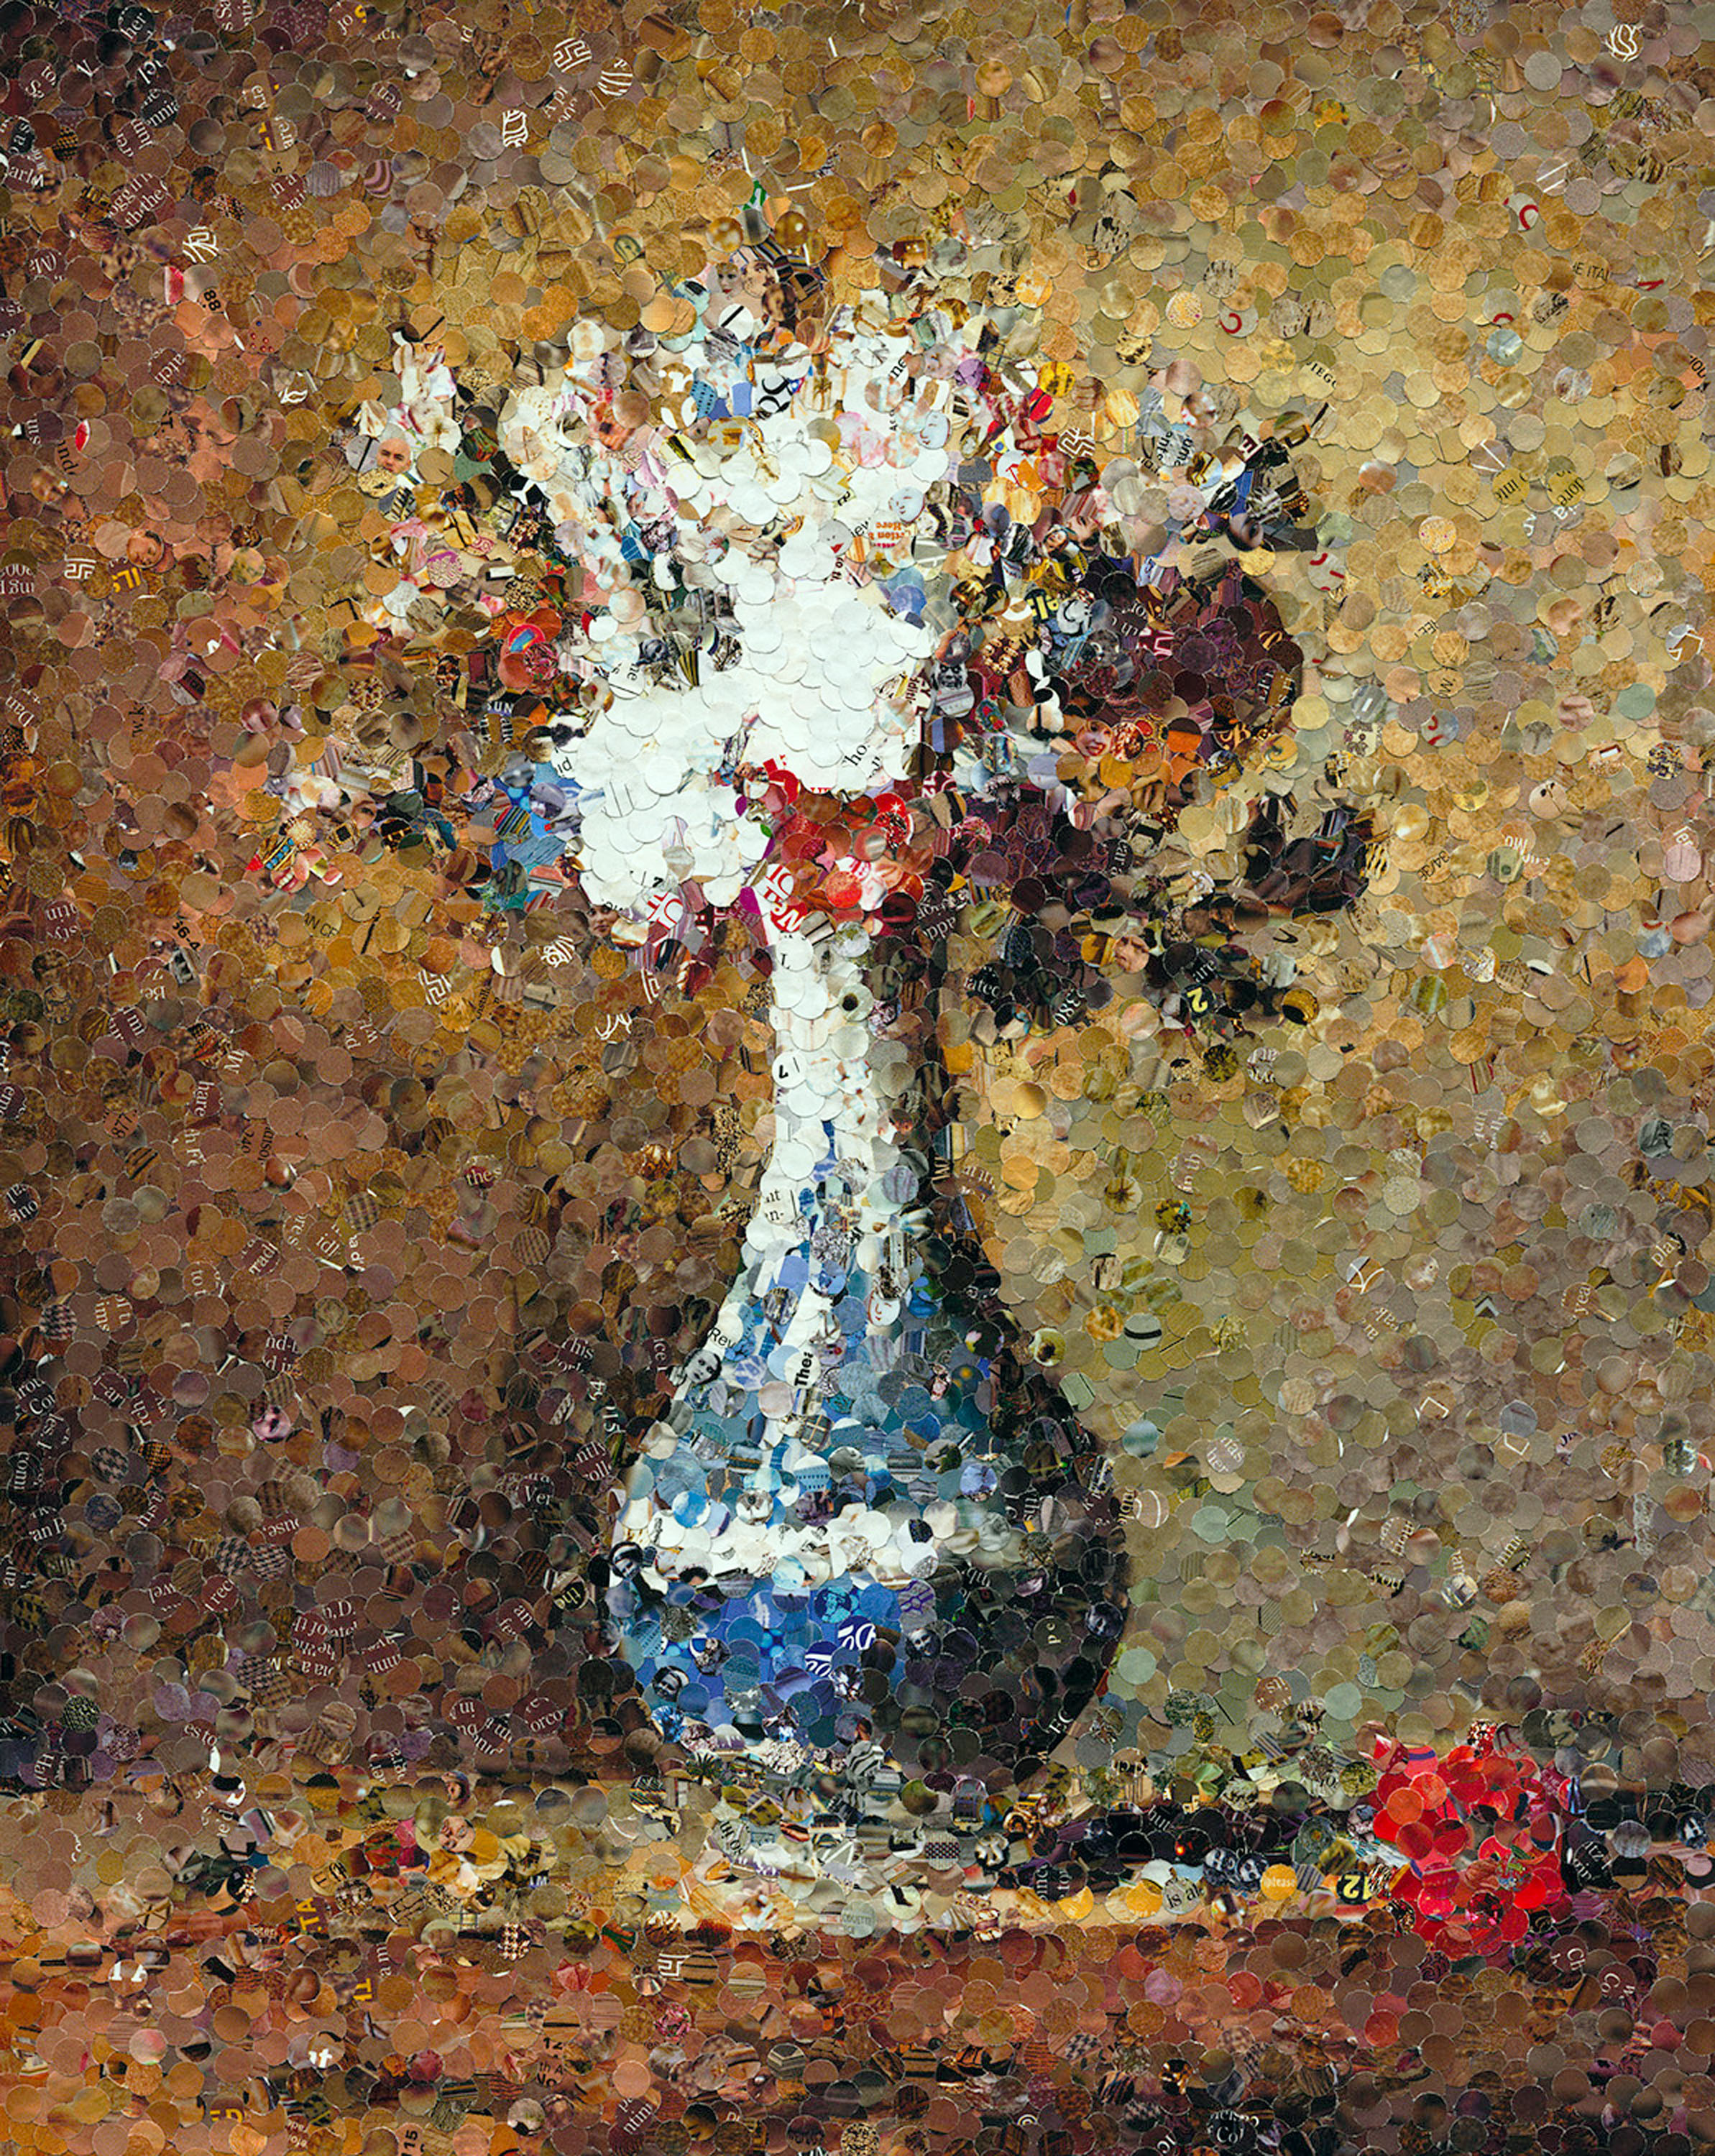 Flowers in a Blue and White Vase, After Chardin (from Pictures of Magazines), 2005